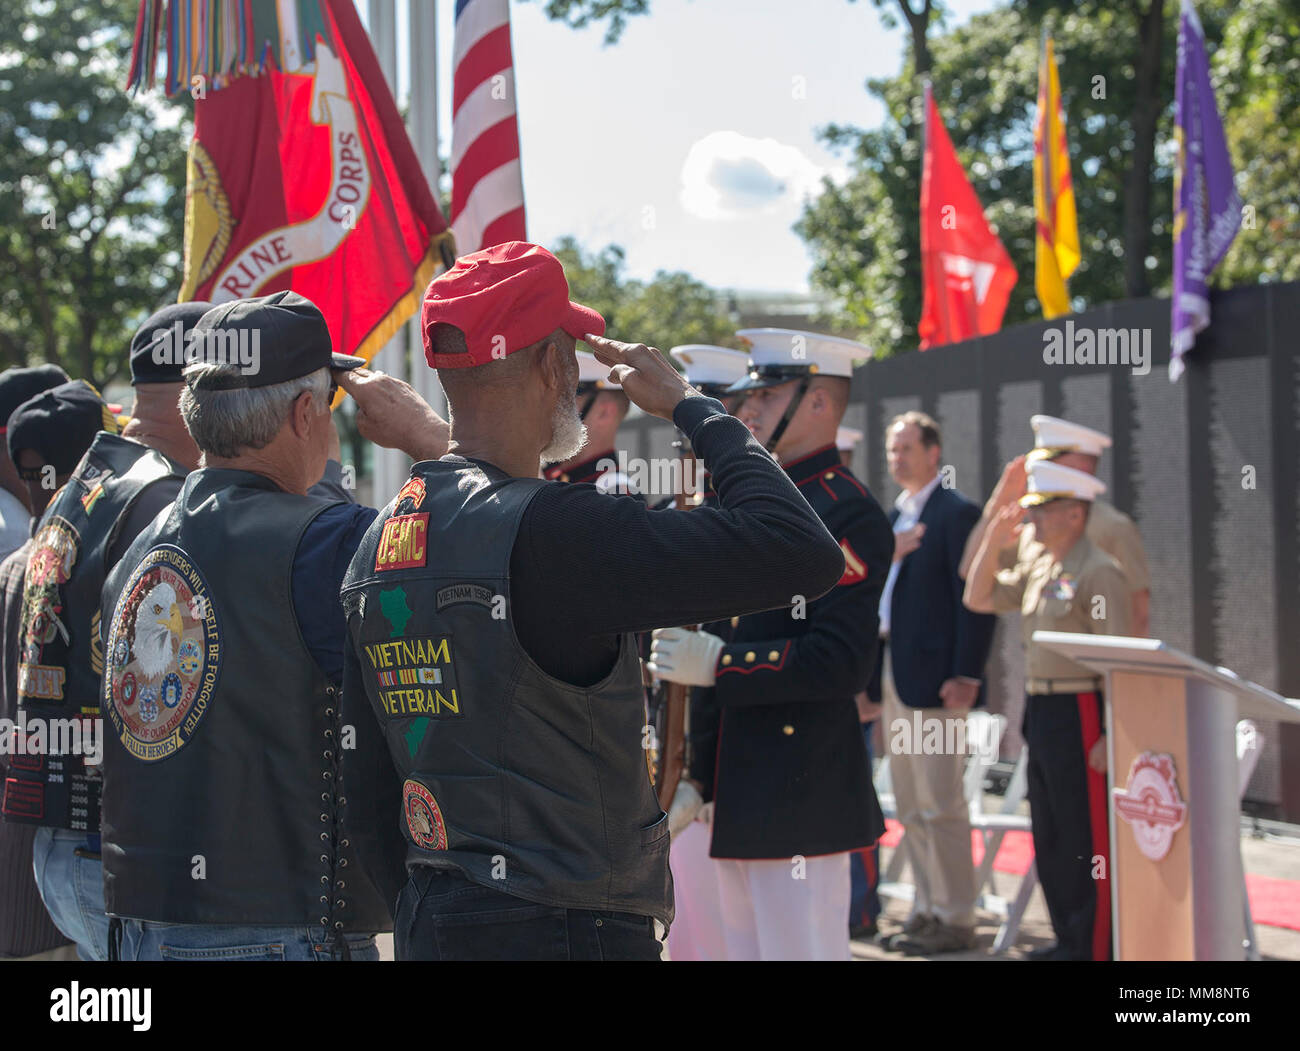 The U.S. Marine Corps Color Guard presents the National Ensign and the U.S. Marine Corps Battle Colors during a Vietnam War pinning ceremony as a part of Marine Week, Detroit, MI., Sept. 8, 2017. The Traveling Vietnam Memorial Wall was set up alongside the Detroit Riverwalk where ten Vietnam veterans received commemorative pins to honor their service and sacrifice to our country. (Official U.S. Marine Corps photo by Cpl. Robert Knapp/Released) Stock Photo